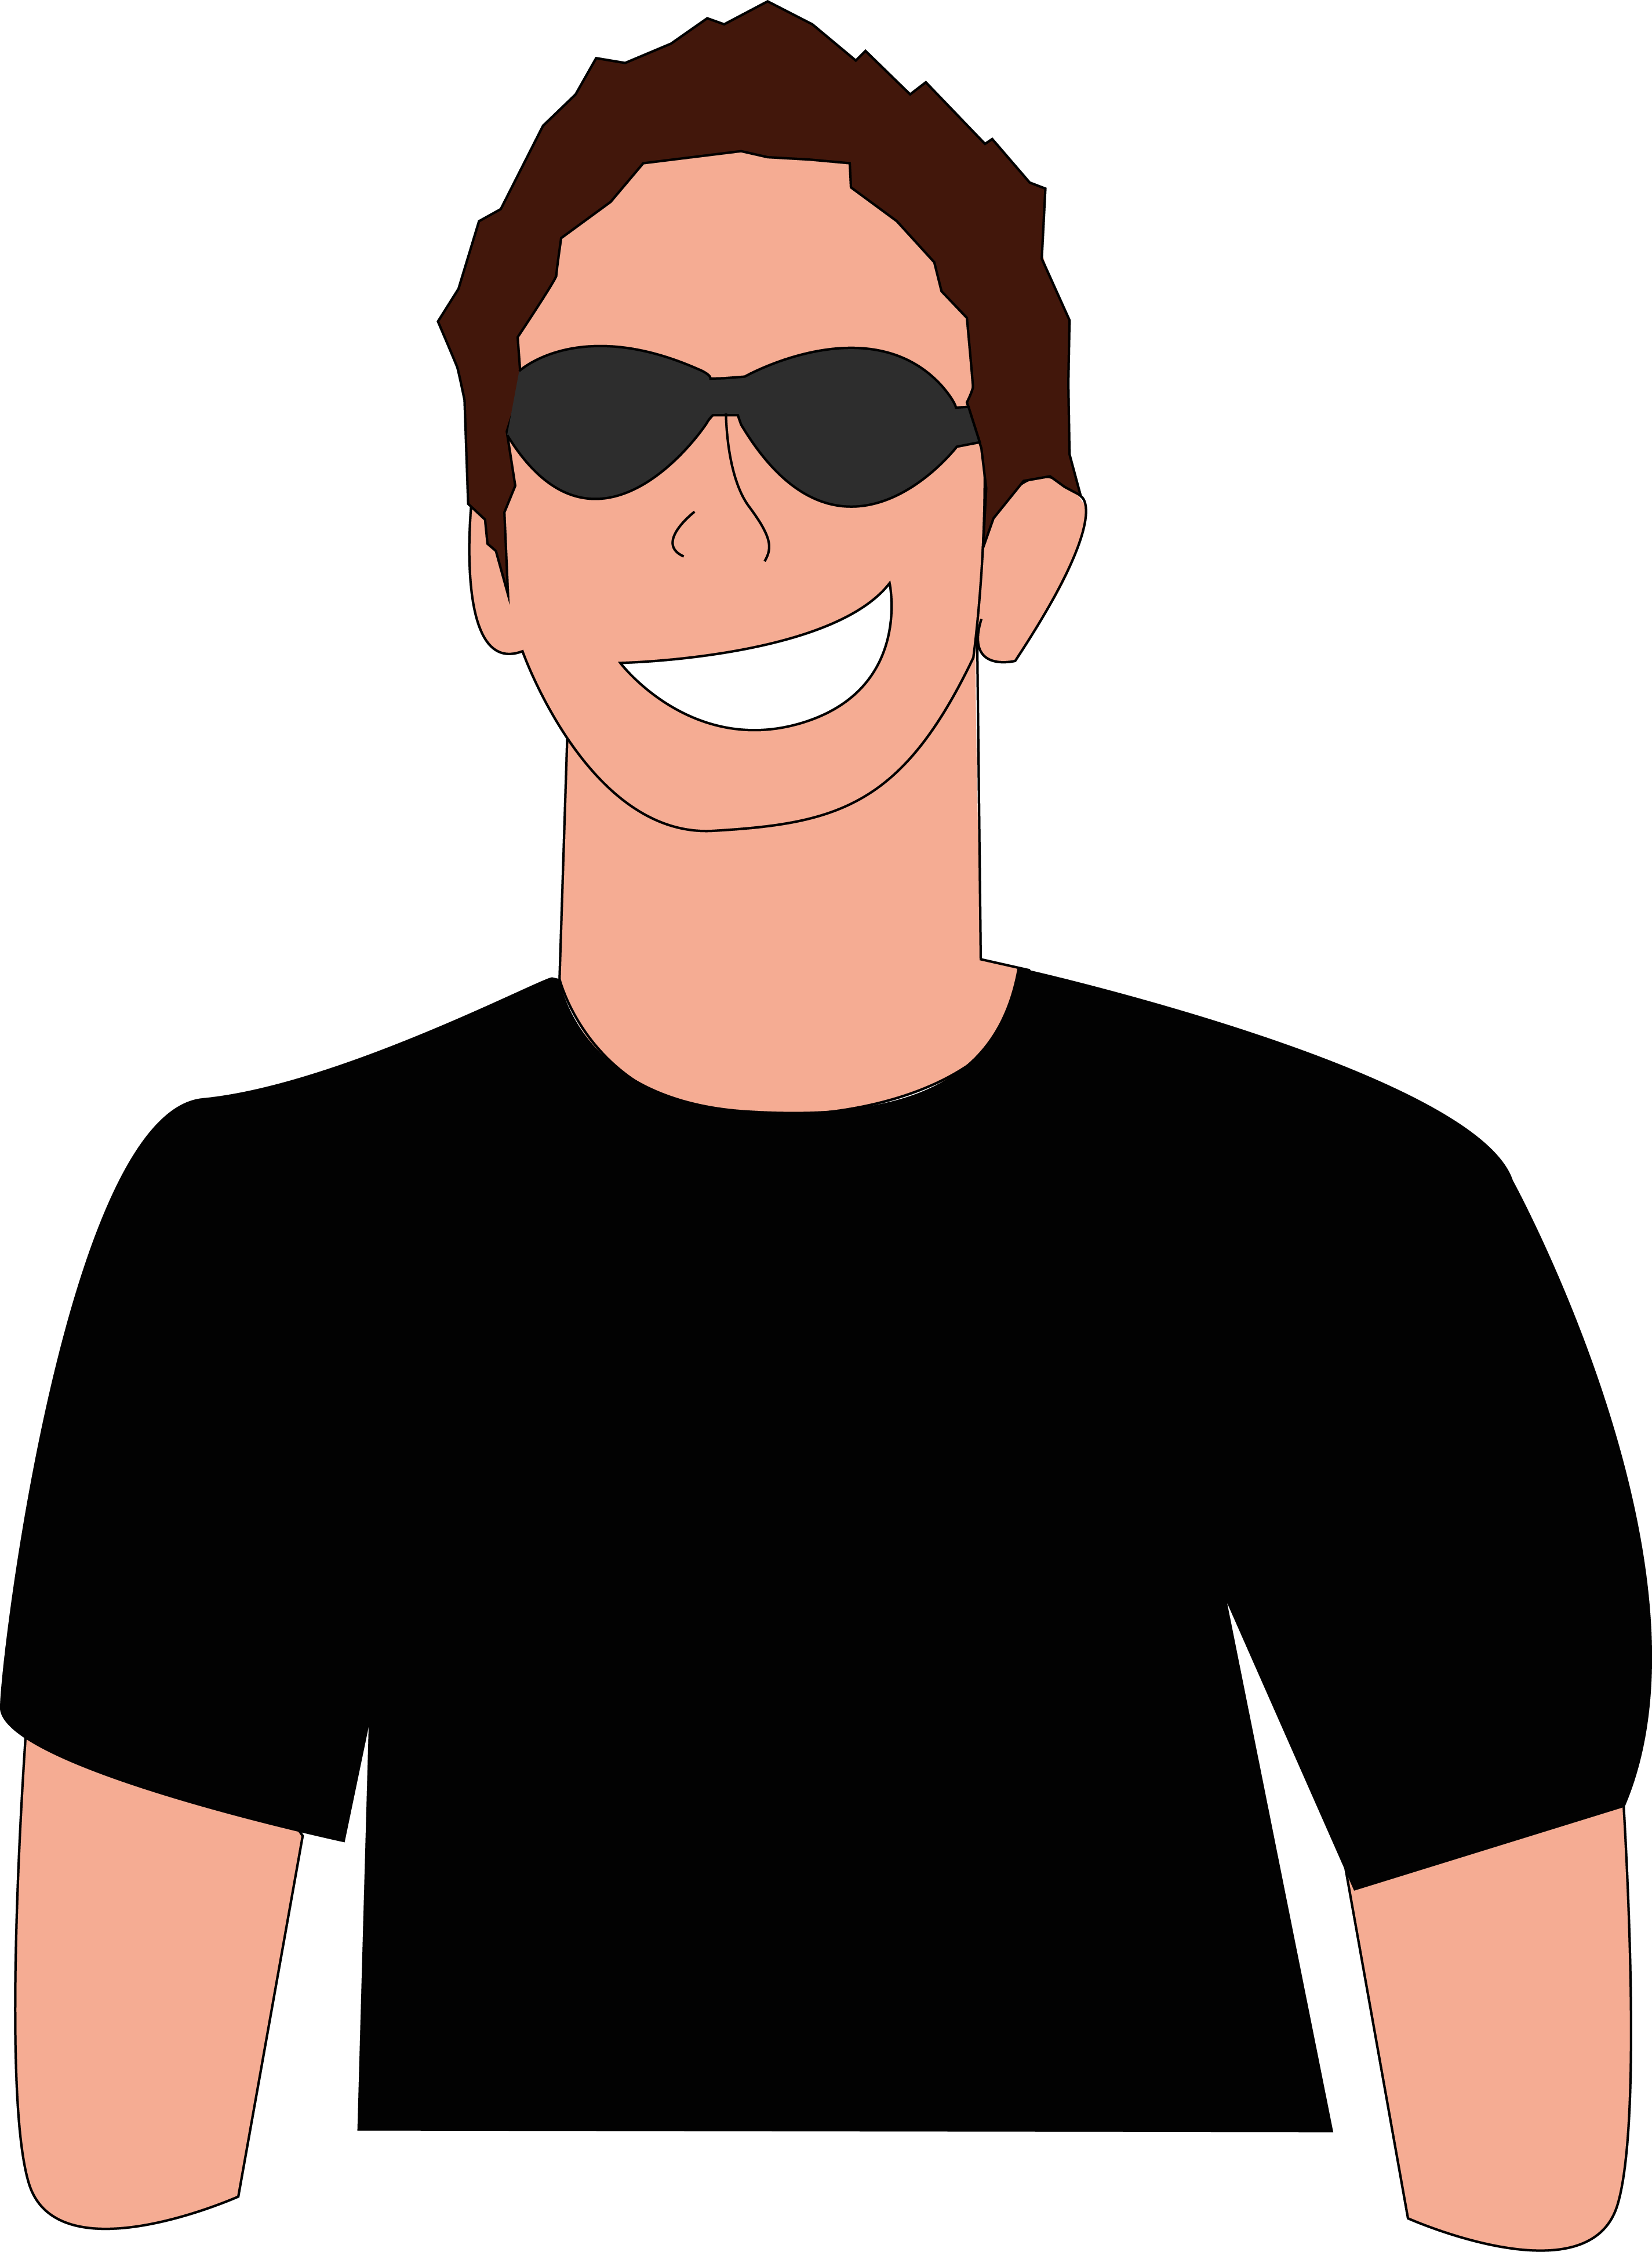  collection of wearing. Sunglasses clipart man clipart